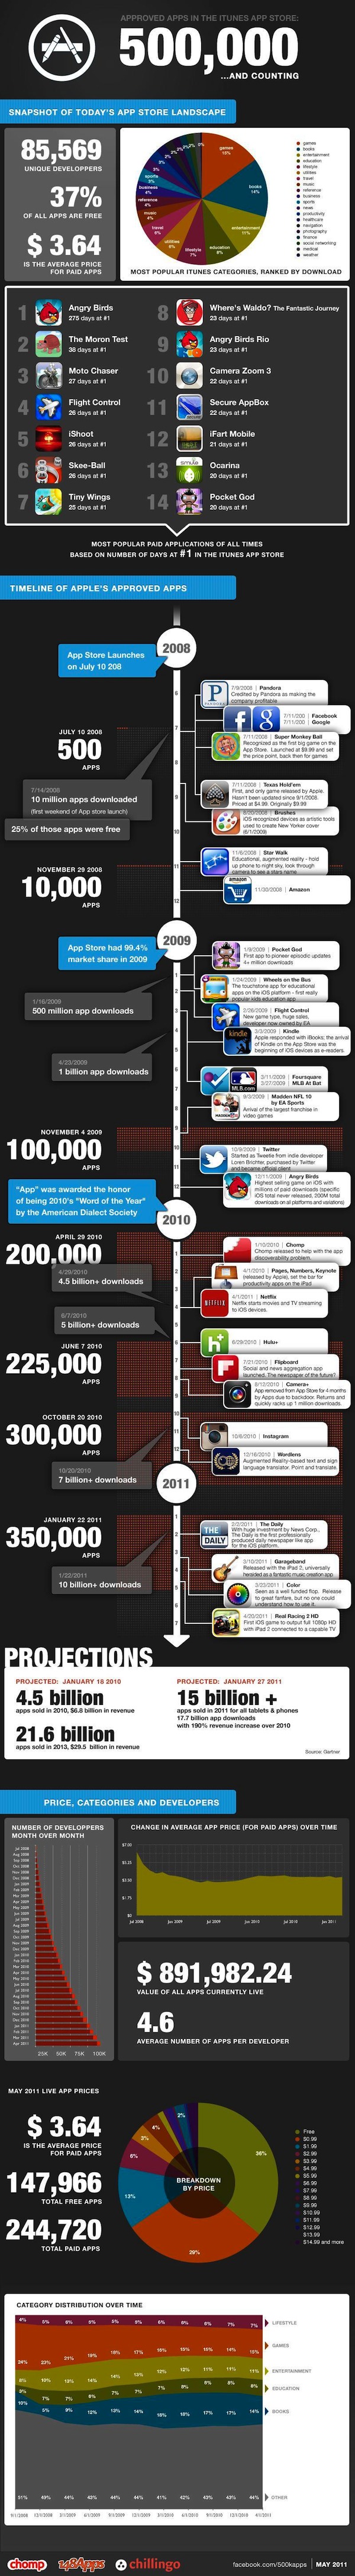 Infographic: Half a Million Apps in iOS App Store 